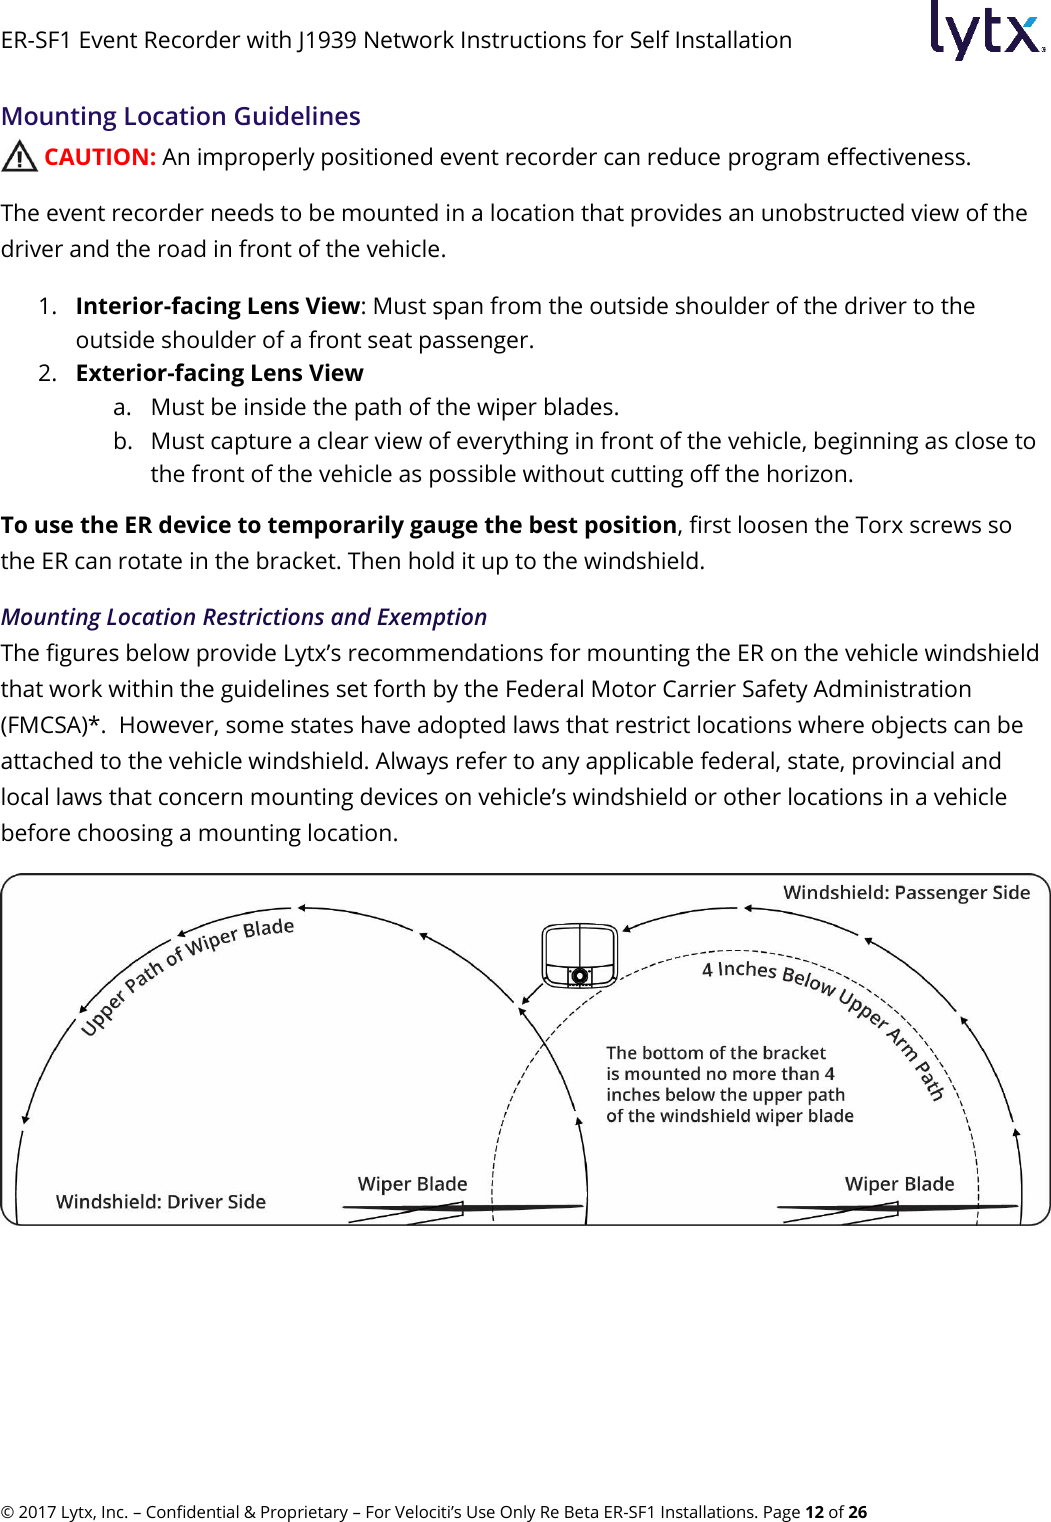 ER-SF1 Event Recorder with J1939 Network Instructions for Self Installation © 2017 Lytx, Inc. – Confidential &amp; Proprietary – For Velociti’s Use Only Re Beta ER-SF1 Installations. Page 12 of 26 Mounting Location Guidelines  CAUTION: An improperly positioned event recorder can reduce program effectiveness. The event recorder needs to be mounted in a location that provides an unobstructed view of the driver and the road in front of the vehicle. 1. Interior-facing Lens View: Must span from the outside shoulder of the driver to the outside shoulder of a front seat passenger. 2. Exterior-facing Lens View a. Must be inside the path of the wiper blades. b. Must capture a clear view of everything in front of the vehicle, beginning as close to the front of the vehicle as possible without cutting off the horizon. To use the ER device to temporarily gauge the best position, first loosen the Torx screws so the ER can rotate in the bracket. Then hold it up to the windshield. Mounting Location Restrictions and Exemption The figures below provide Lytx’s recommendations for mounting the ER on the vehicle windshield that work within the guidelines set forth by the Federal Motor Carrier Safety Administration (FMCSA)*.  However, some states have adopted laws that restrict locations where objects can be attached to the vehicle windshield. Always refer to any applicable federal, state, provincial and local laws that concern mounting devices on vehicle’s windshield or other locations in a vehicle before choosing a mounting location.  